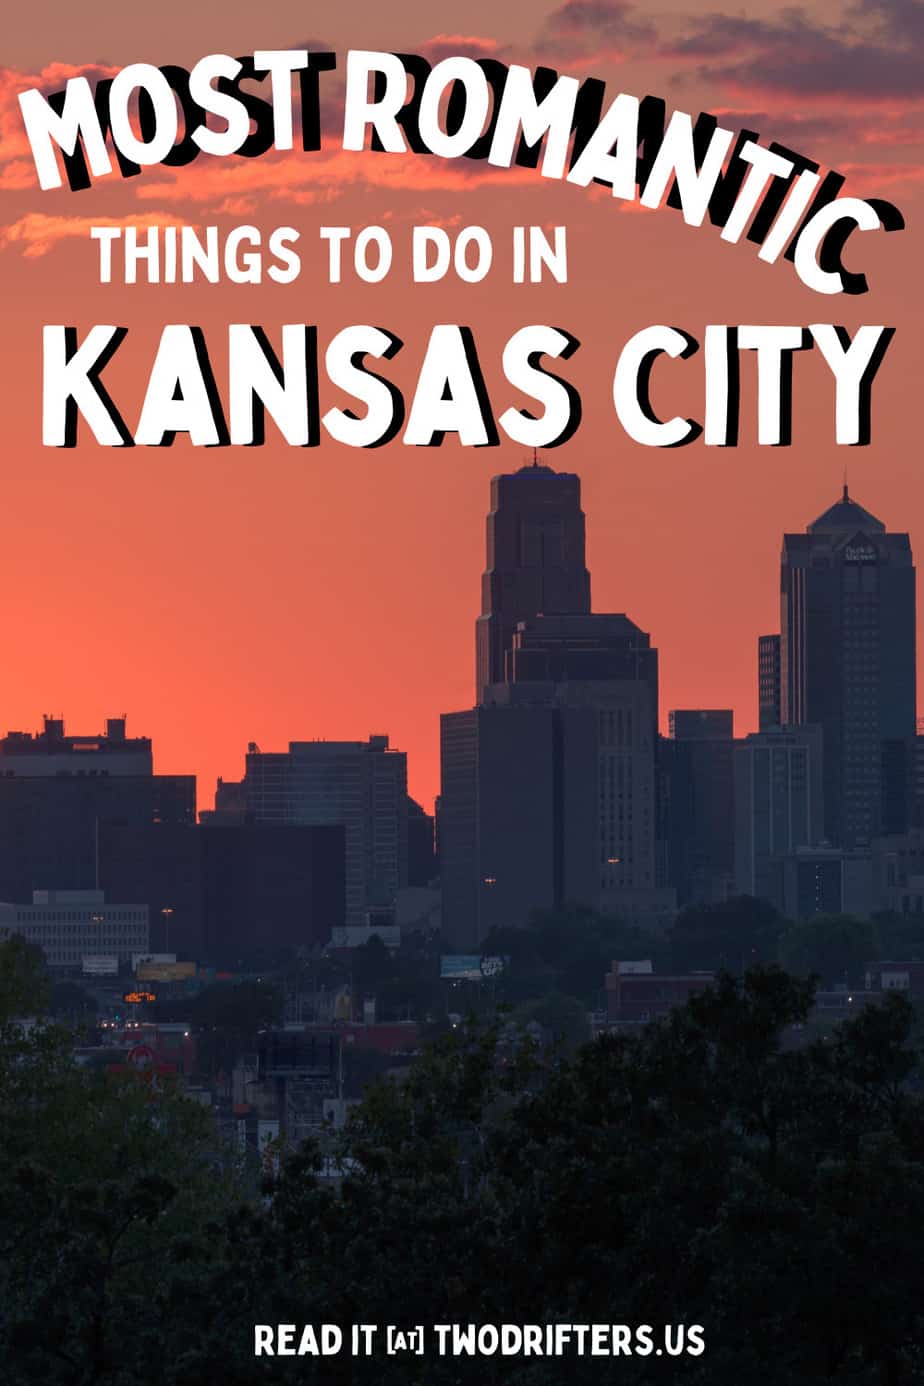 Pinterest social image that says “Most romantic things to do in Kansas City.”